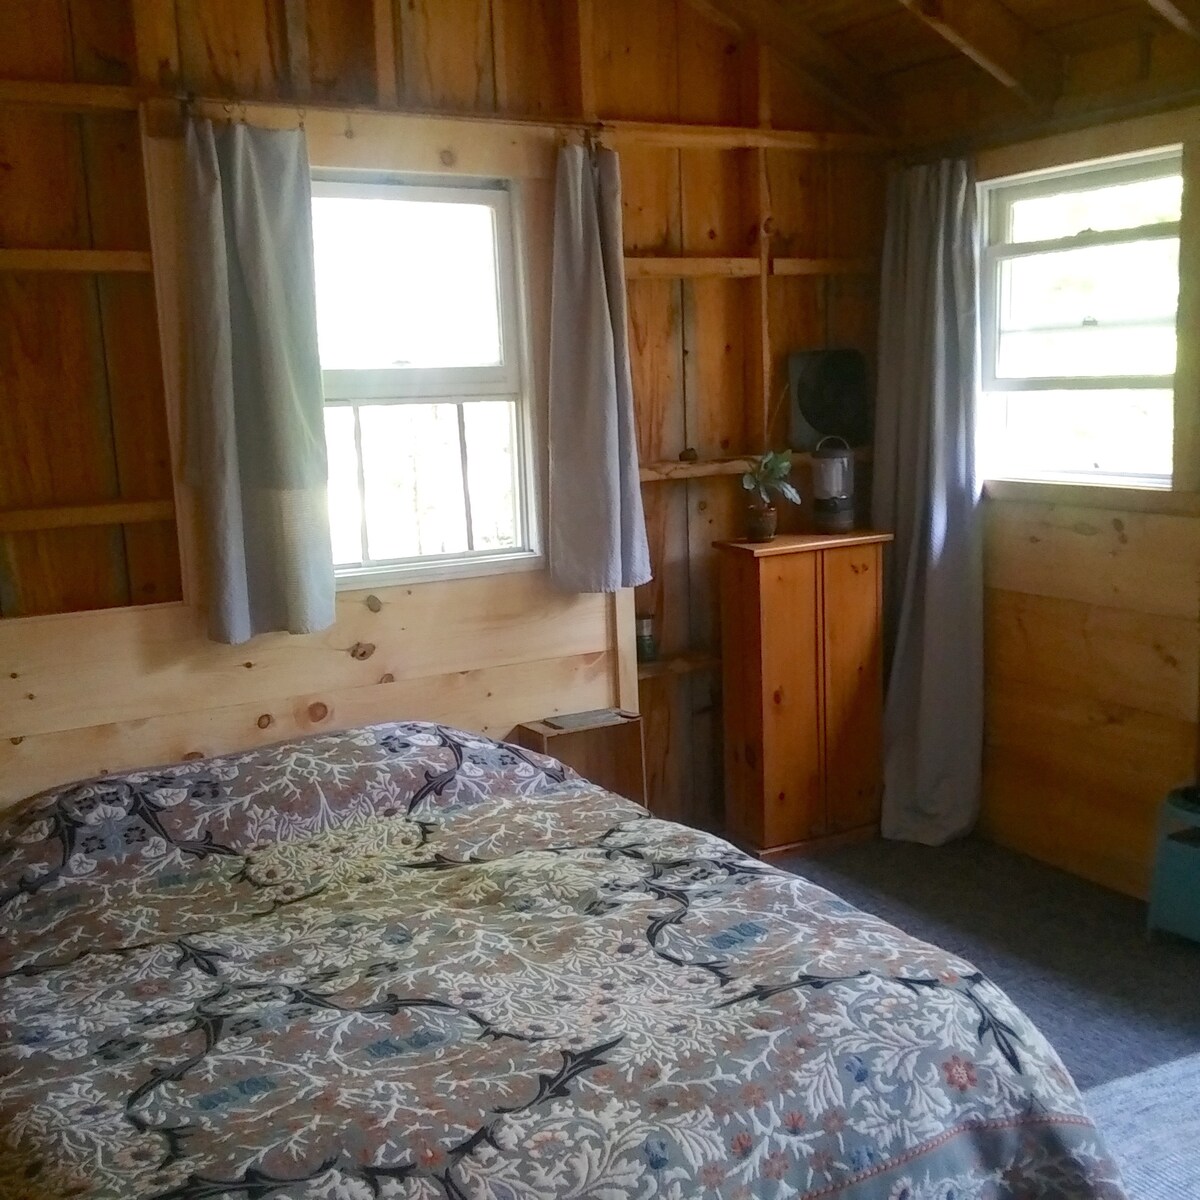 dreamy glamping in Maine woods, cannabis included